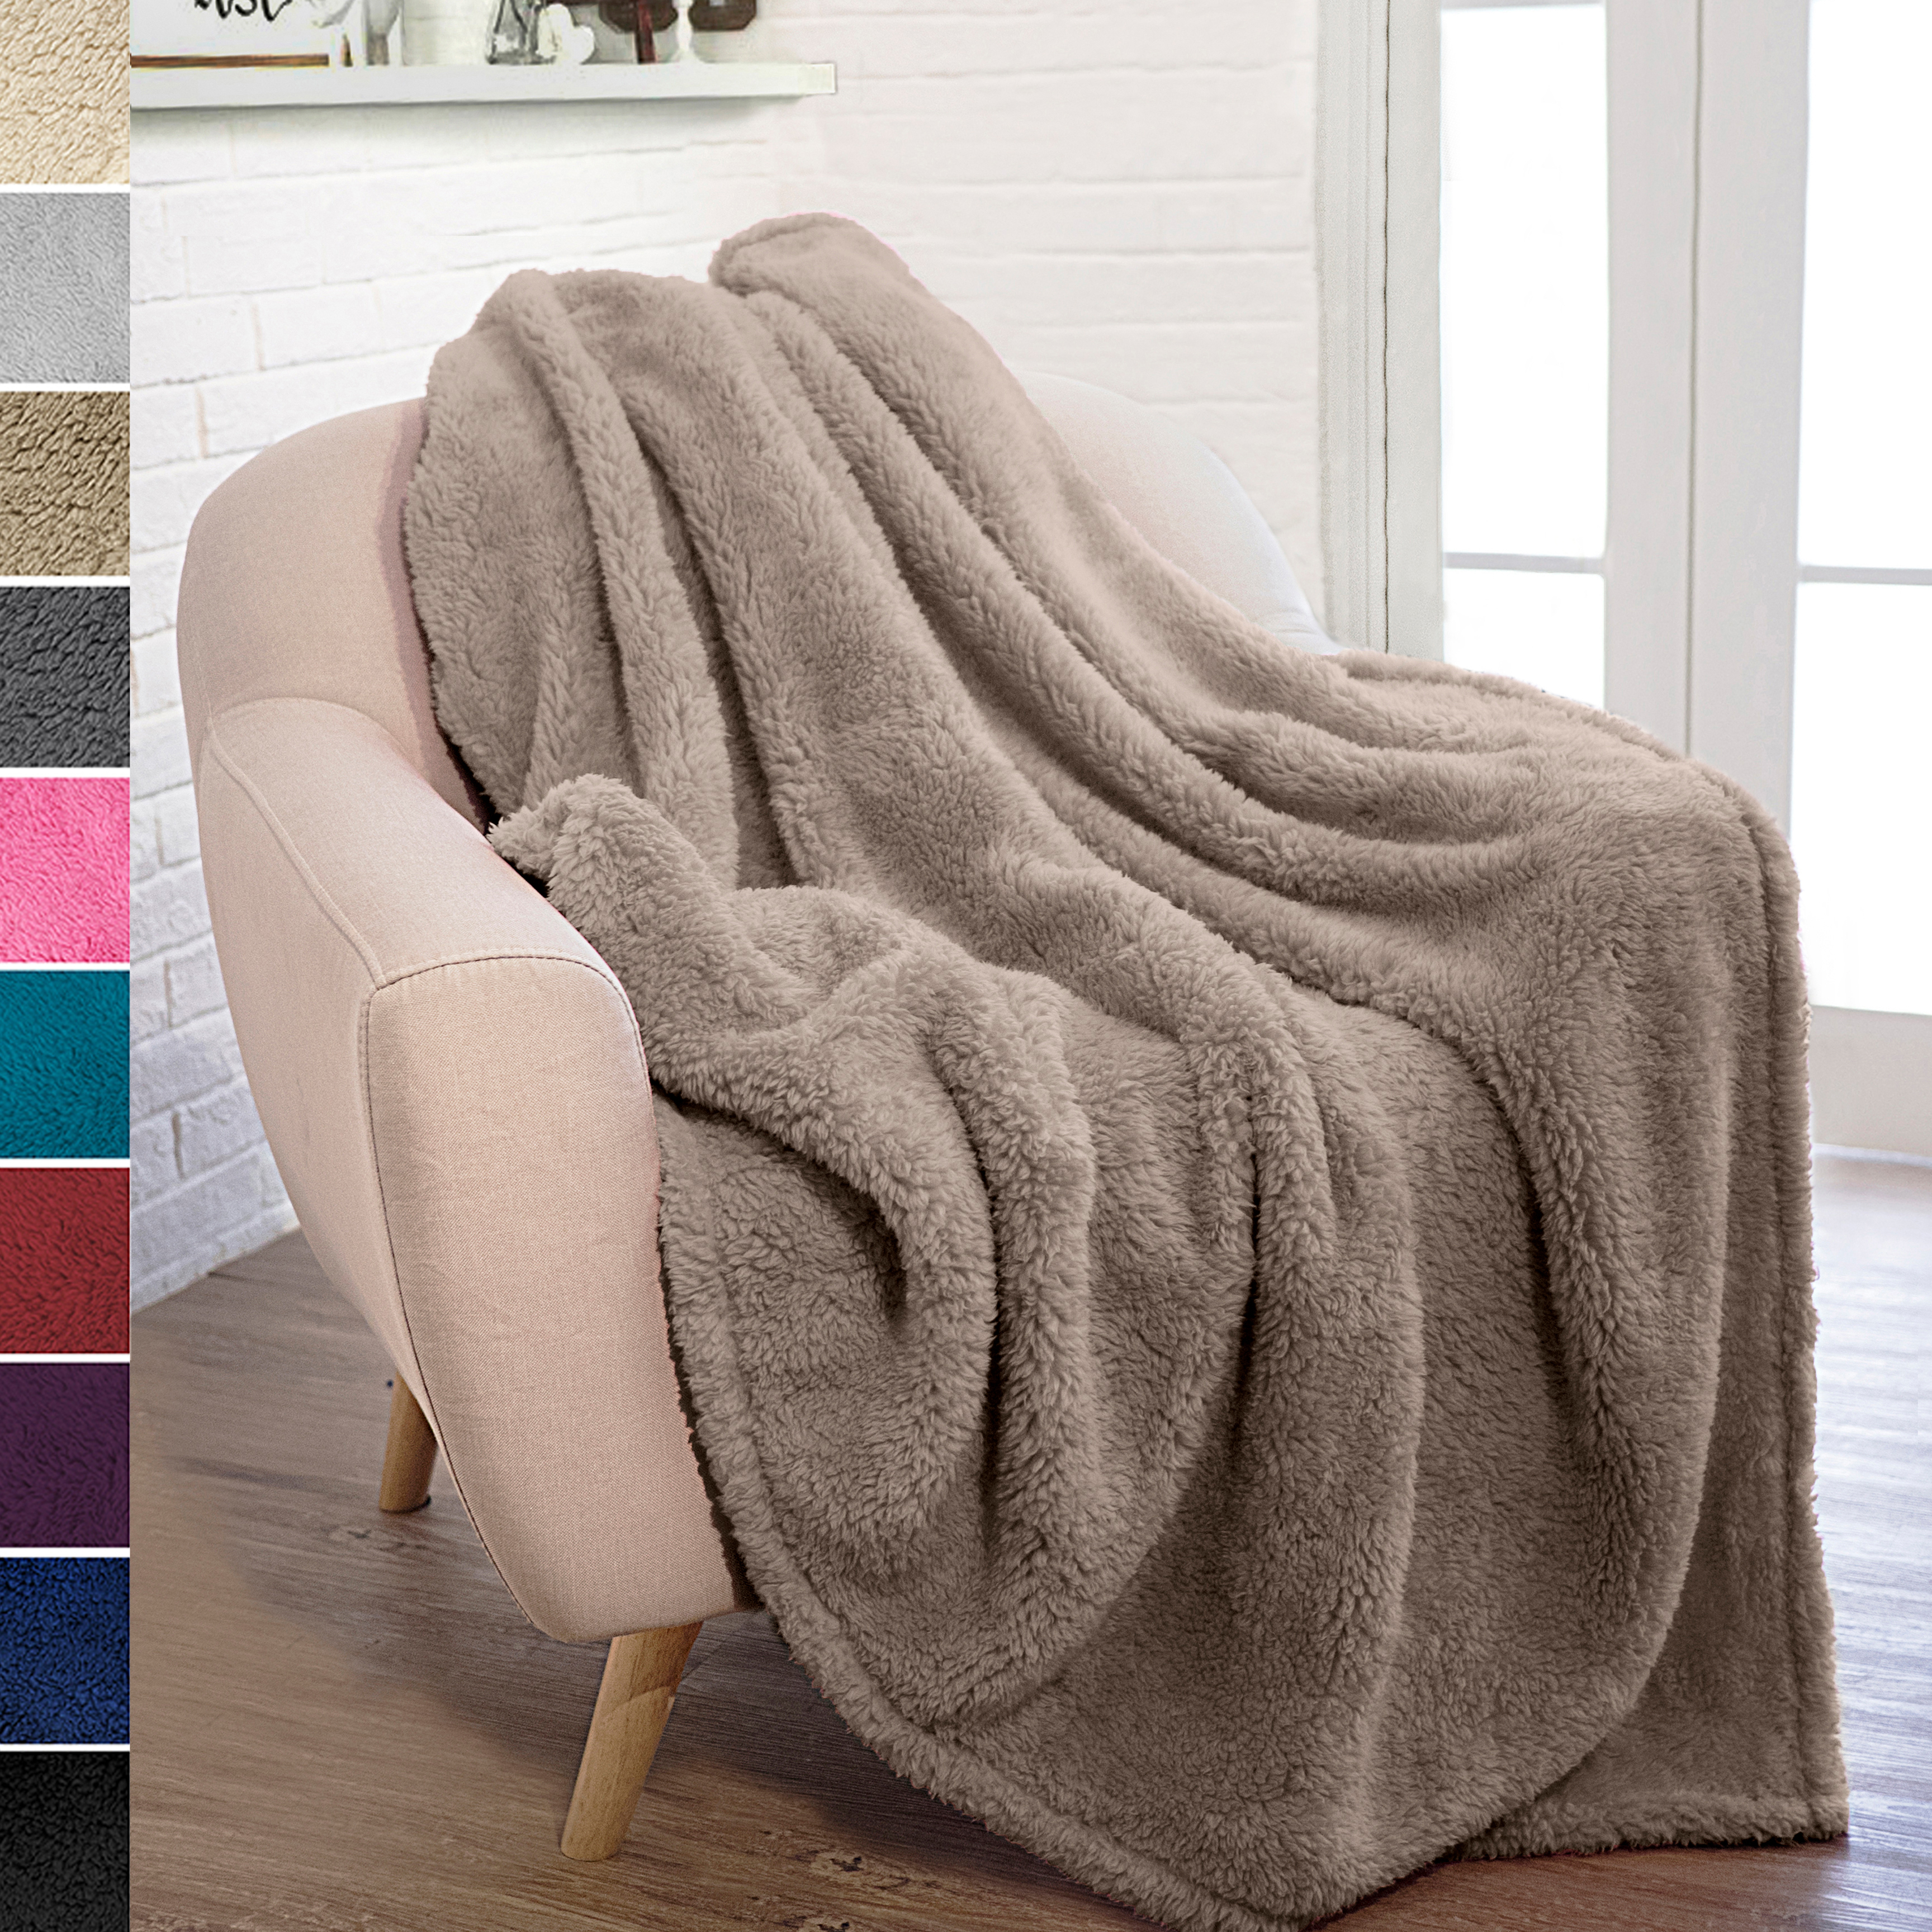 Zadaling Sherpa Fleece Blanket Throws,Happy Easter Lucky Egg Pattern Soft Bed Blanket Cozy Luxury Blanket 40x50,Fuzzy Thick Reversible Warm Fluffy Microfiber Plush Throw Blanket for Couch Bed Sofa 